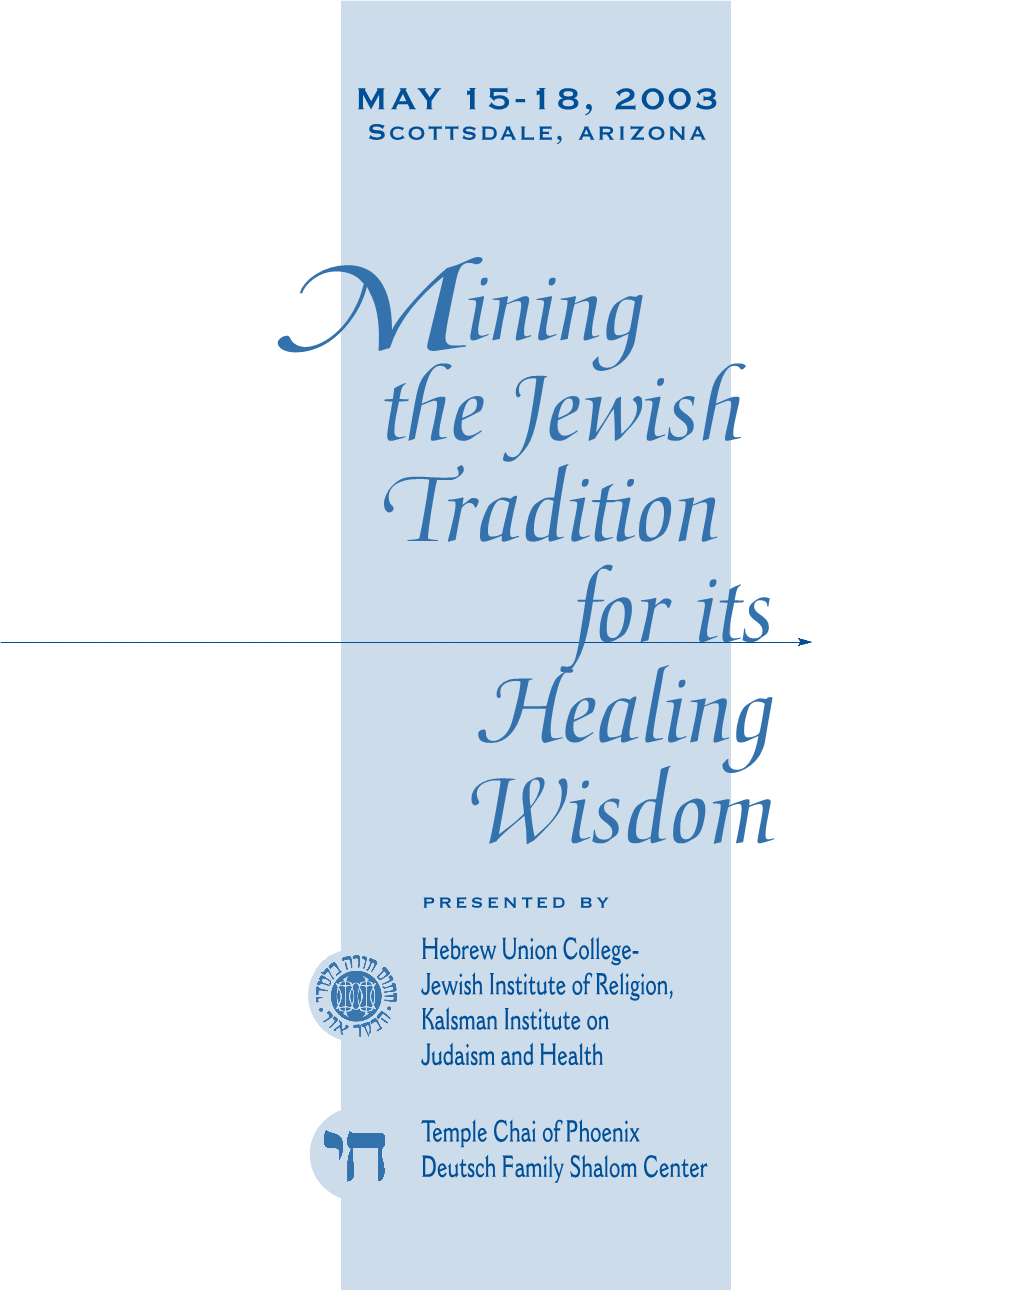 Ining the Jewish Tradition for Its Healing Wisdom Presented by Hebrew Union College- Jewish Institute of Religion, Kalsman Institute on Judaism and Health